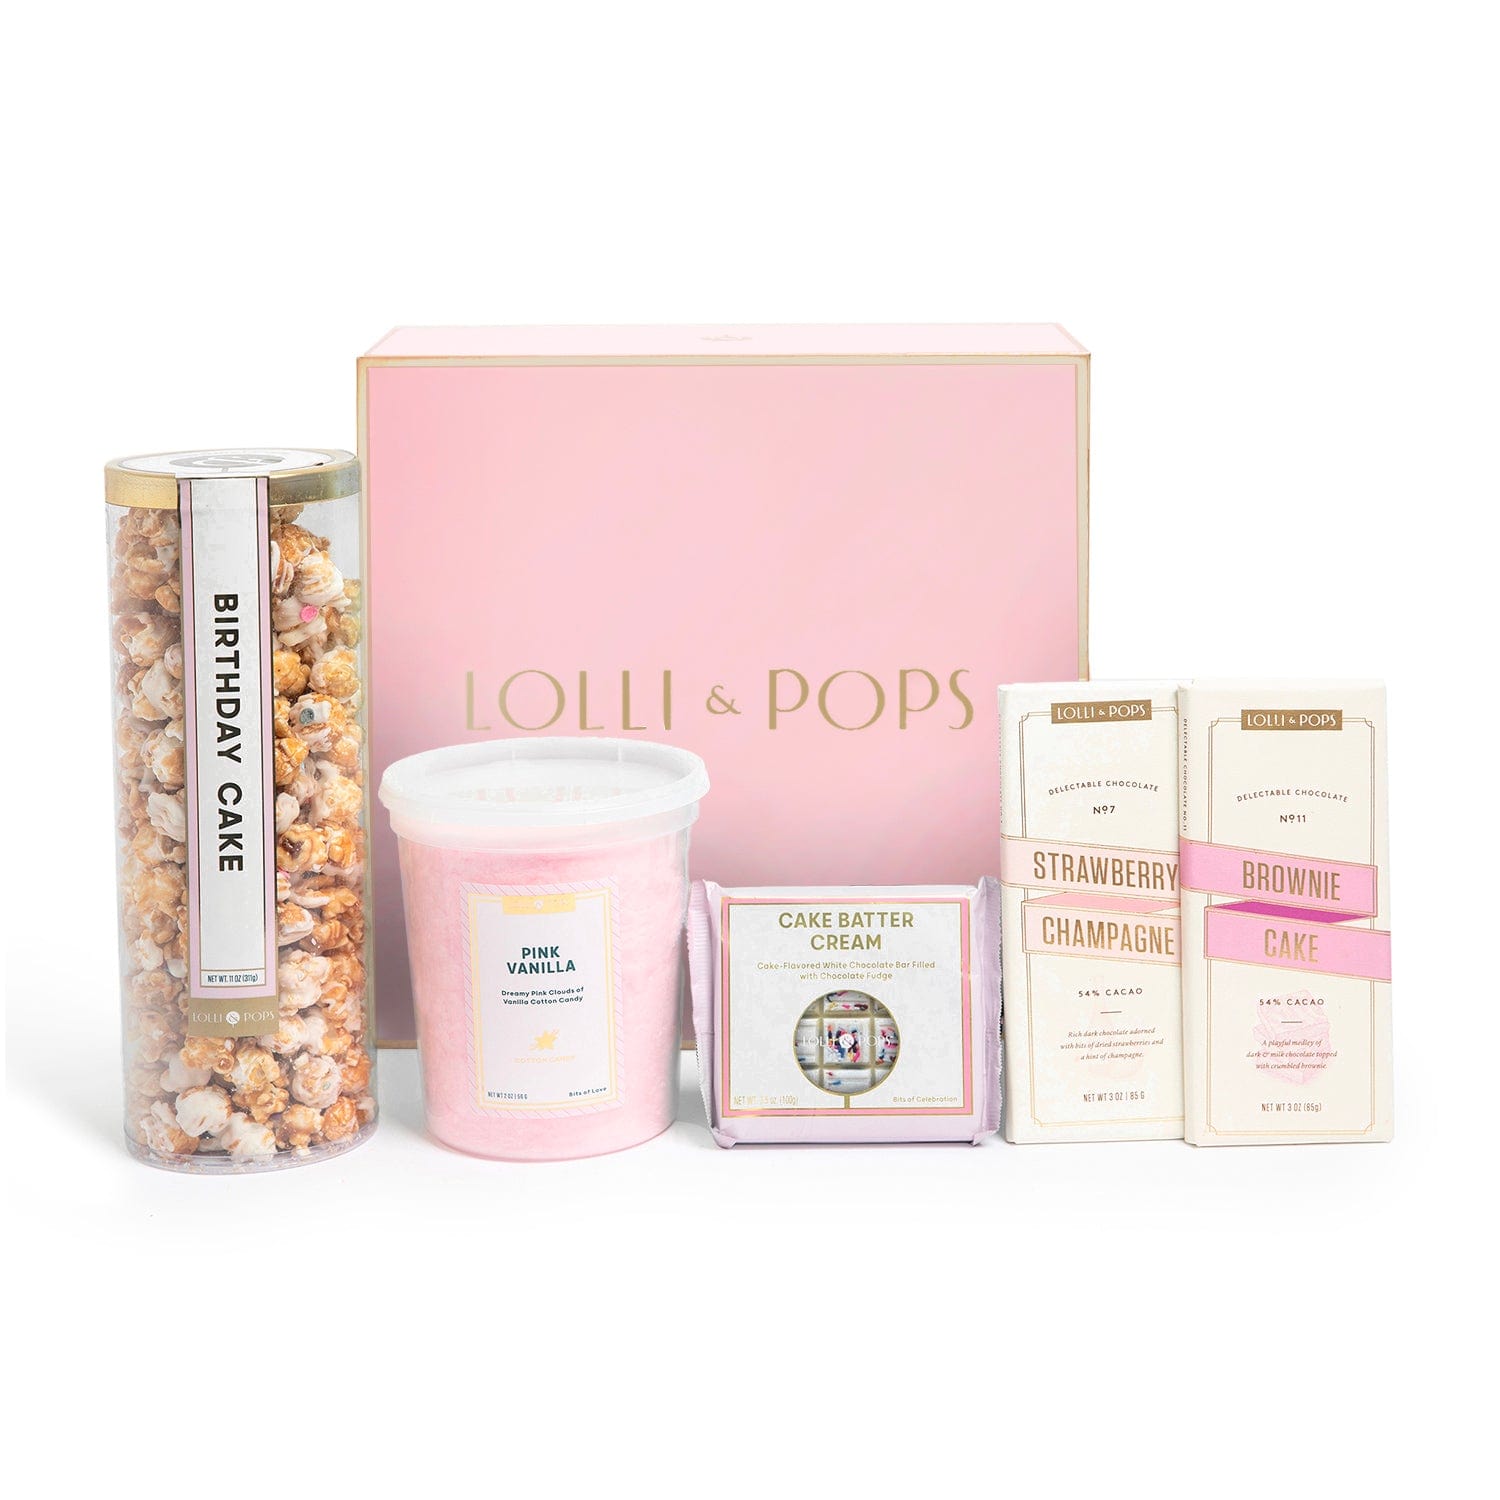 Lolli and Pops Gift Boxes Pretty in Pink Gift Box